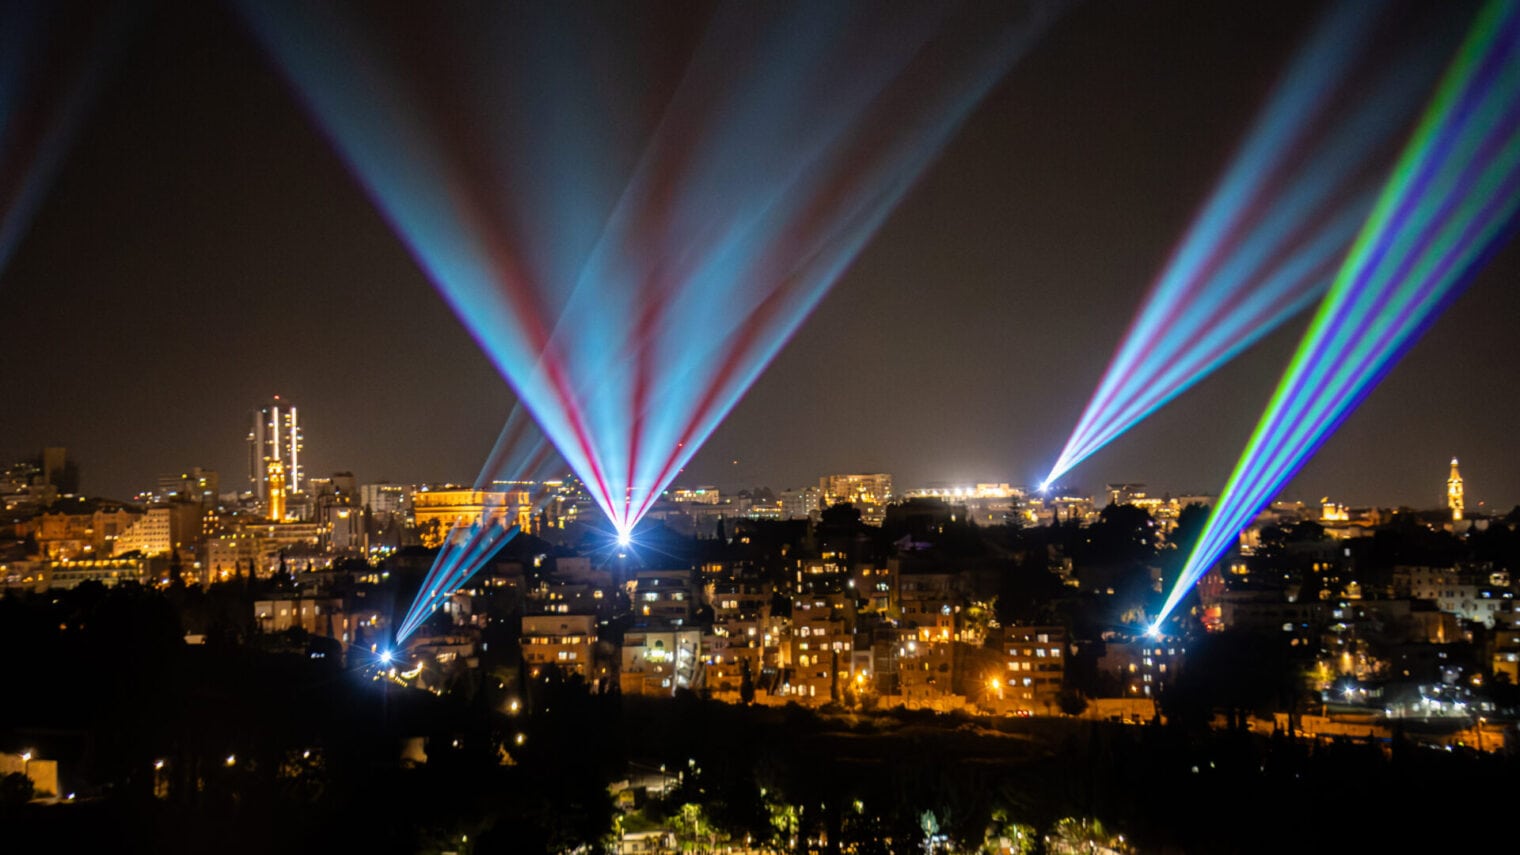 The Jerusalem laser light show in full effect over the holy city. Photo by Dor Pazuelo.